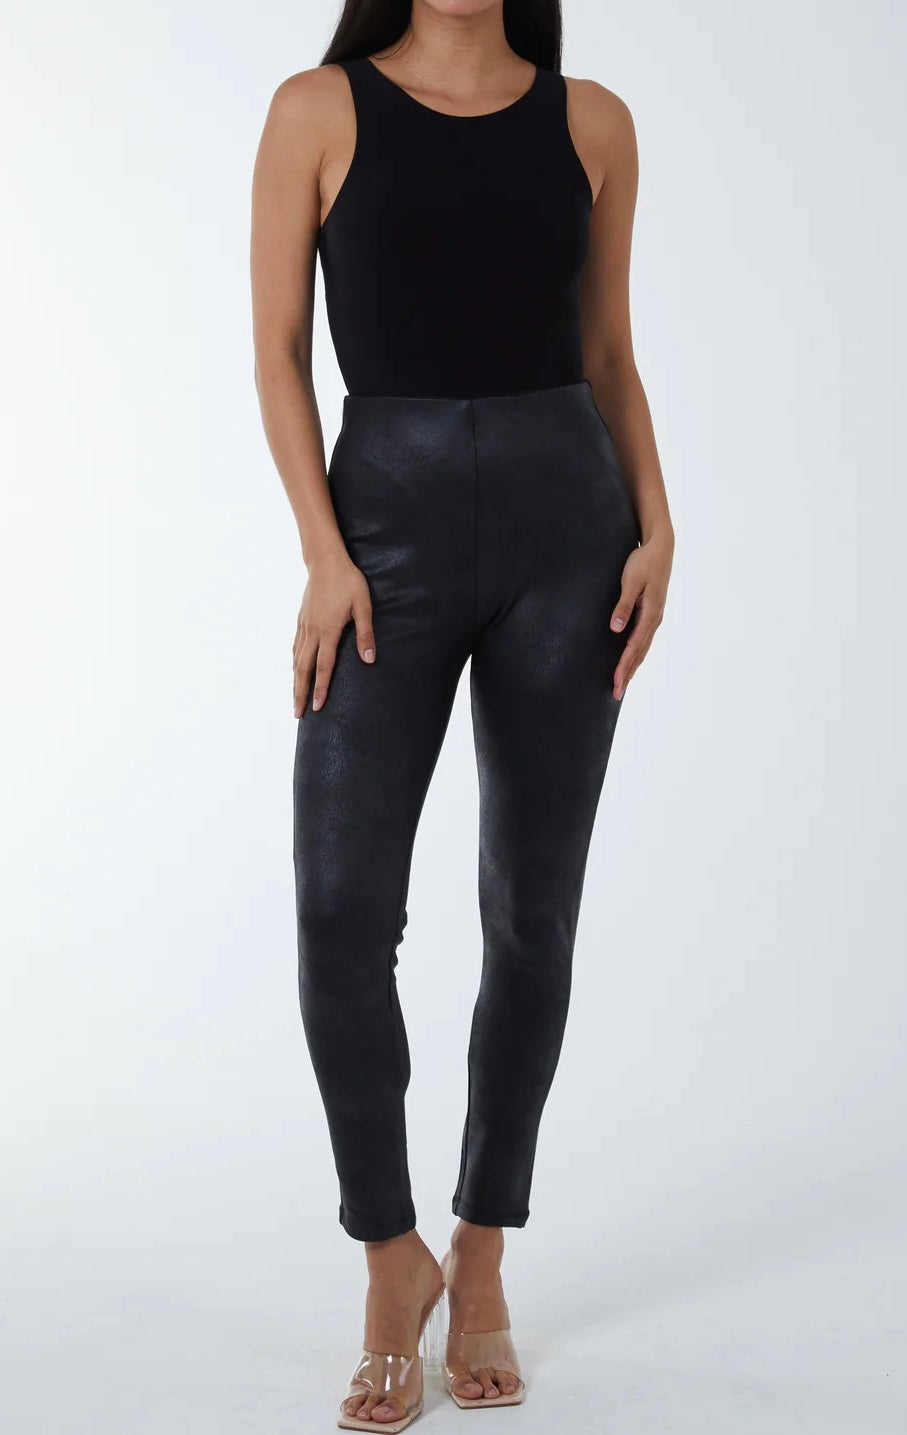 Leggings & Matte Leeds – Accessories in Leather Online: Missy Based Look Black Shoes, Fashion